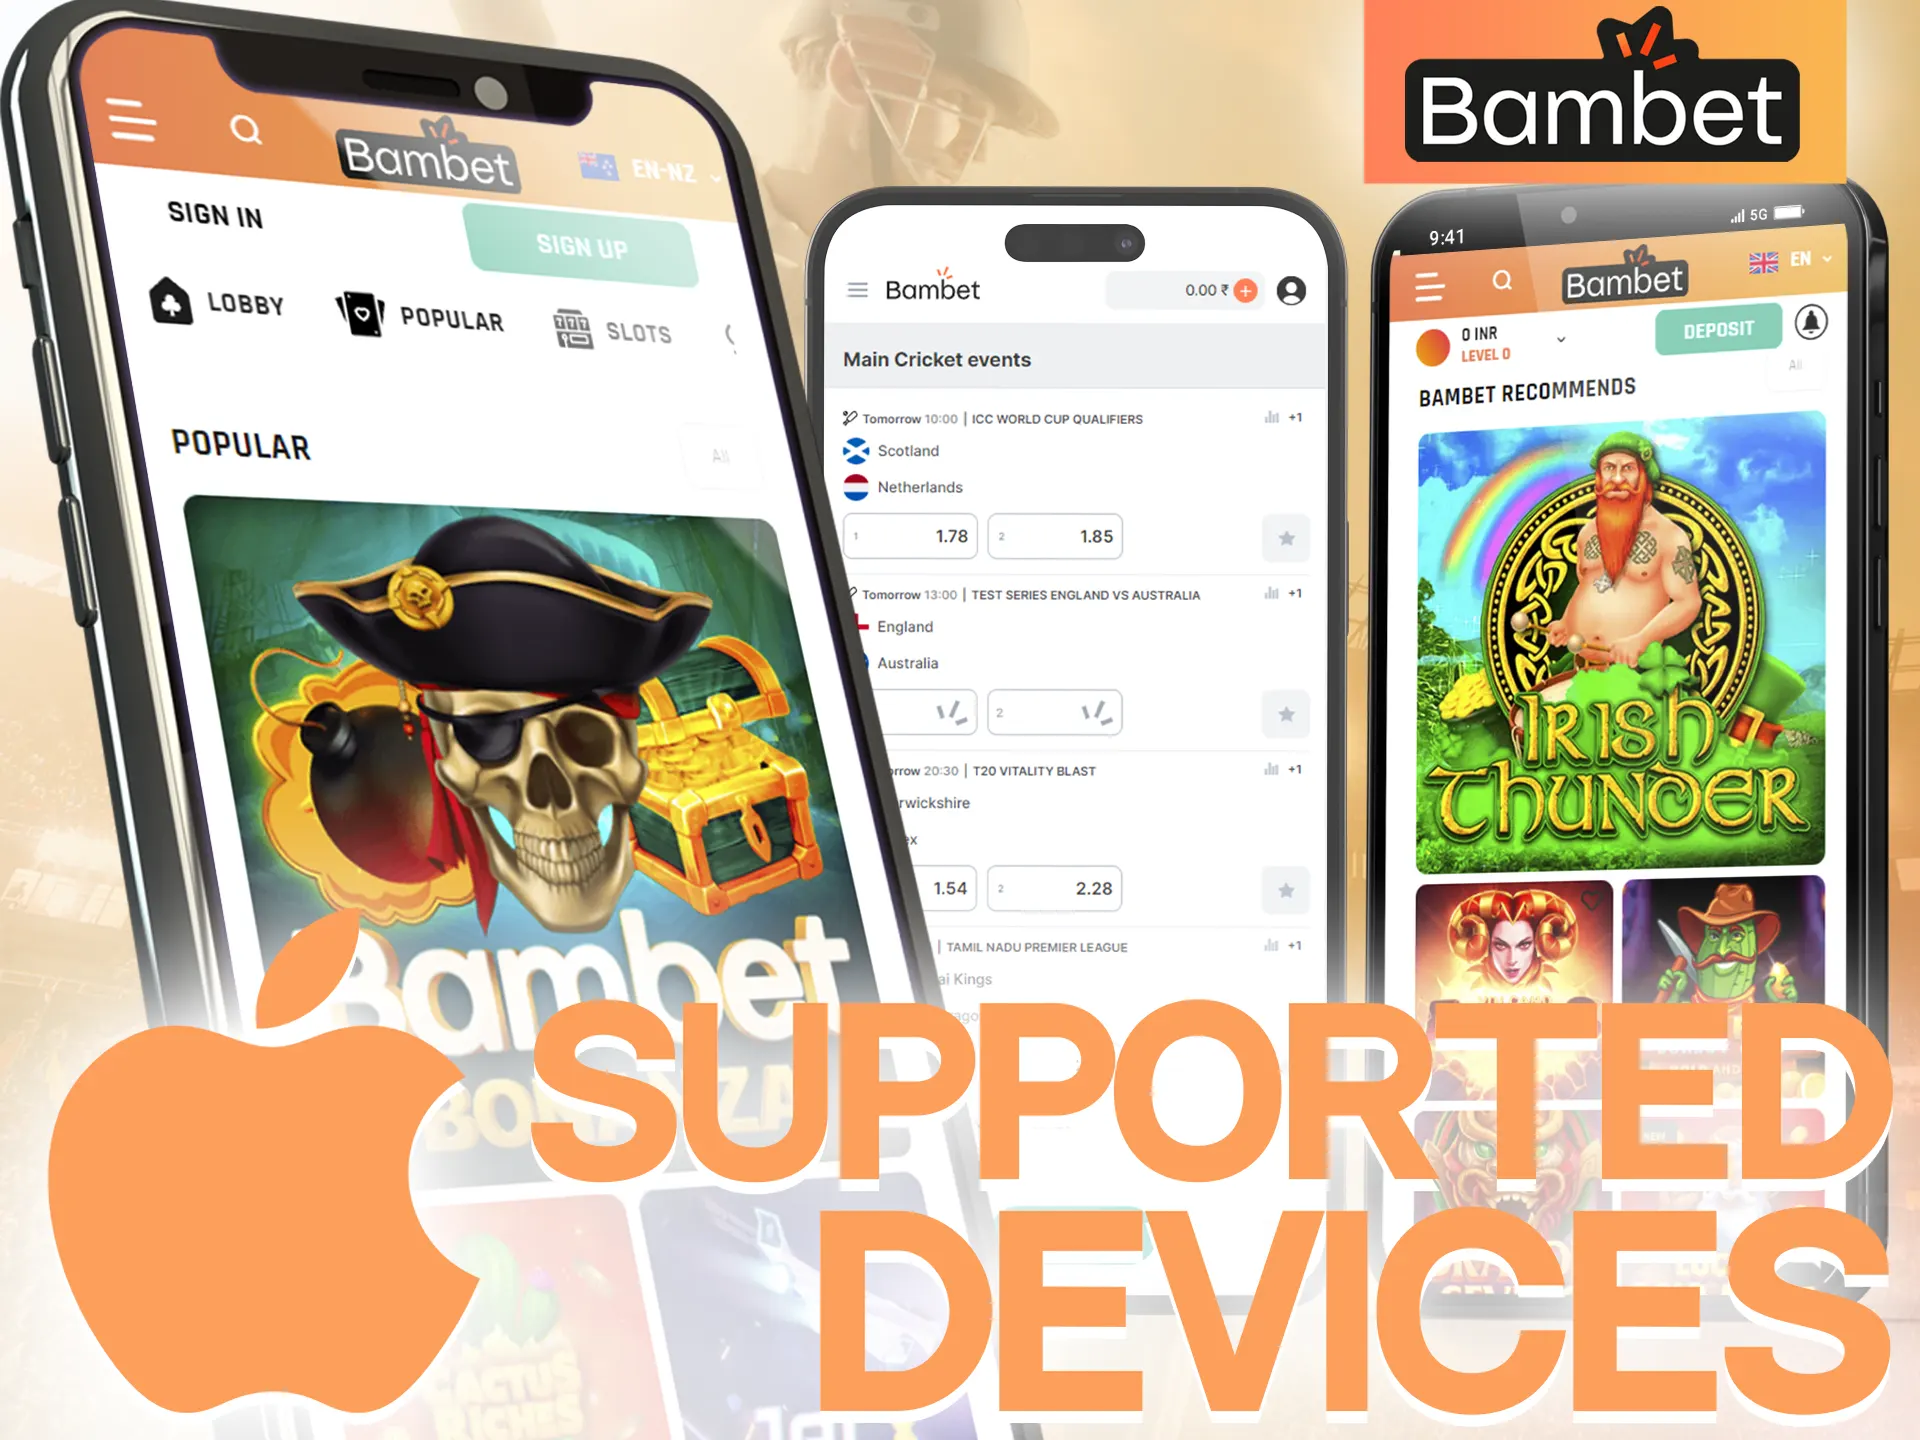 The Bambet app can be installed on a variety of devices with the iOS system.